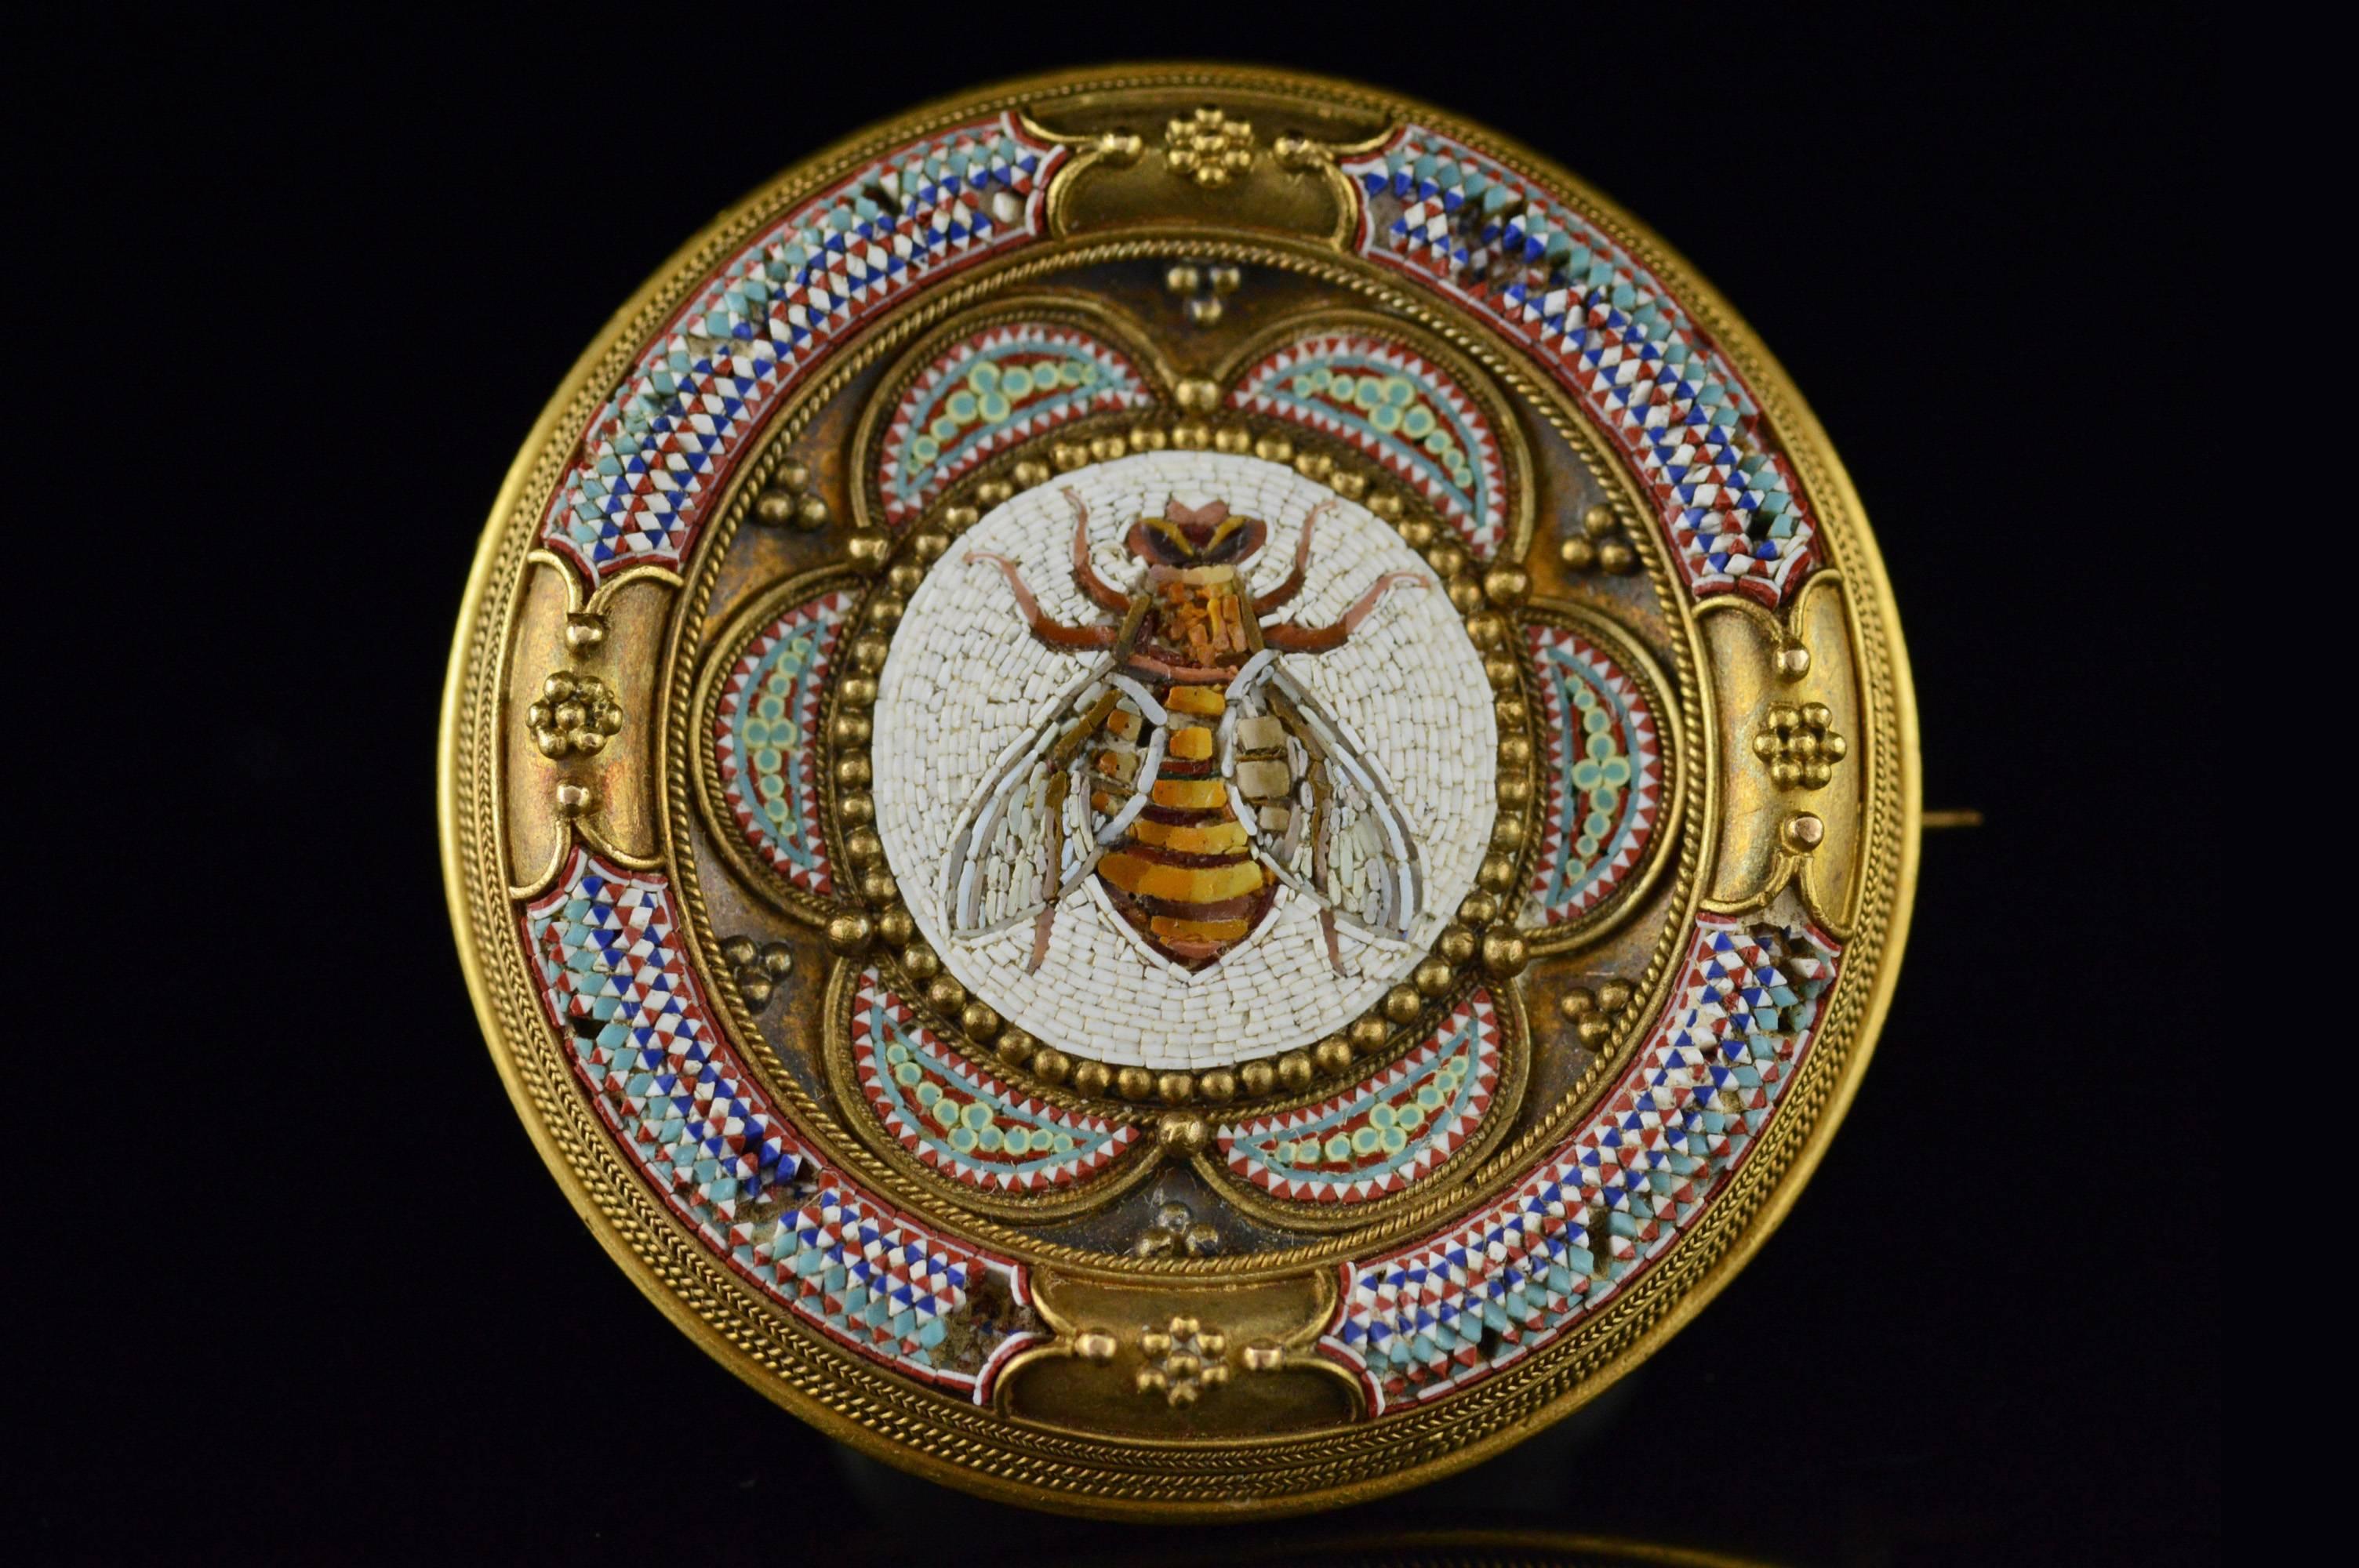 ·Item: 18K Victorian Micro Mosaic Bumblebee Pin/Brooch Yellow Gold

·Era: Victorian / 1870s

·Composition: 18k Gold Acid Tested

·Condition: Some of the micro mosaic has collapsed into the gold frame

·Weight: 17.5g